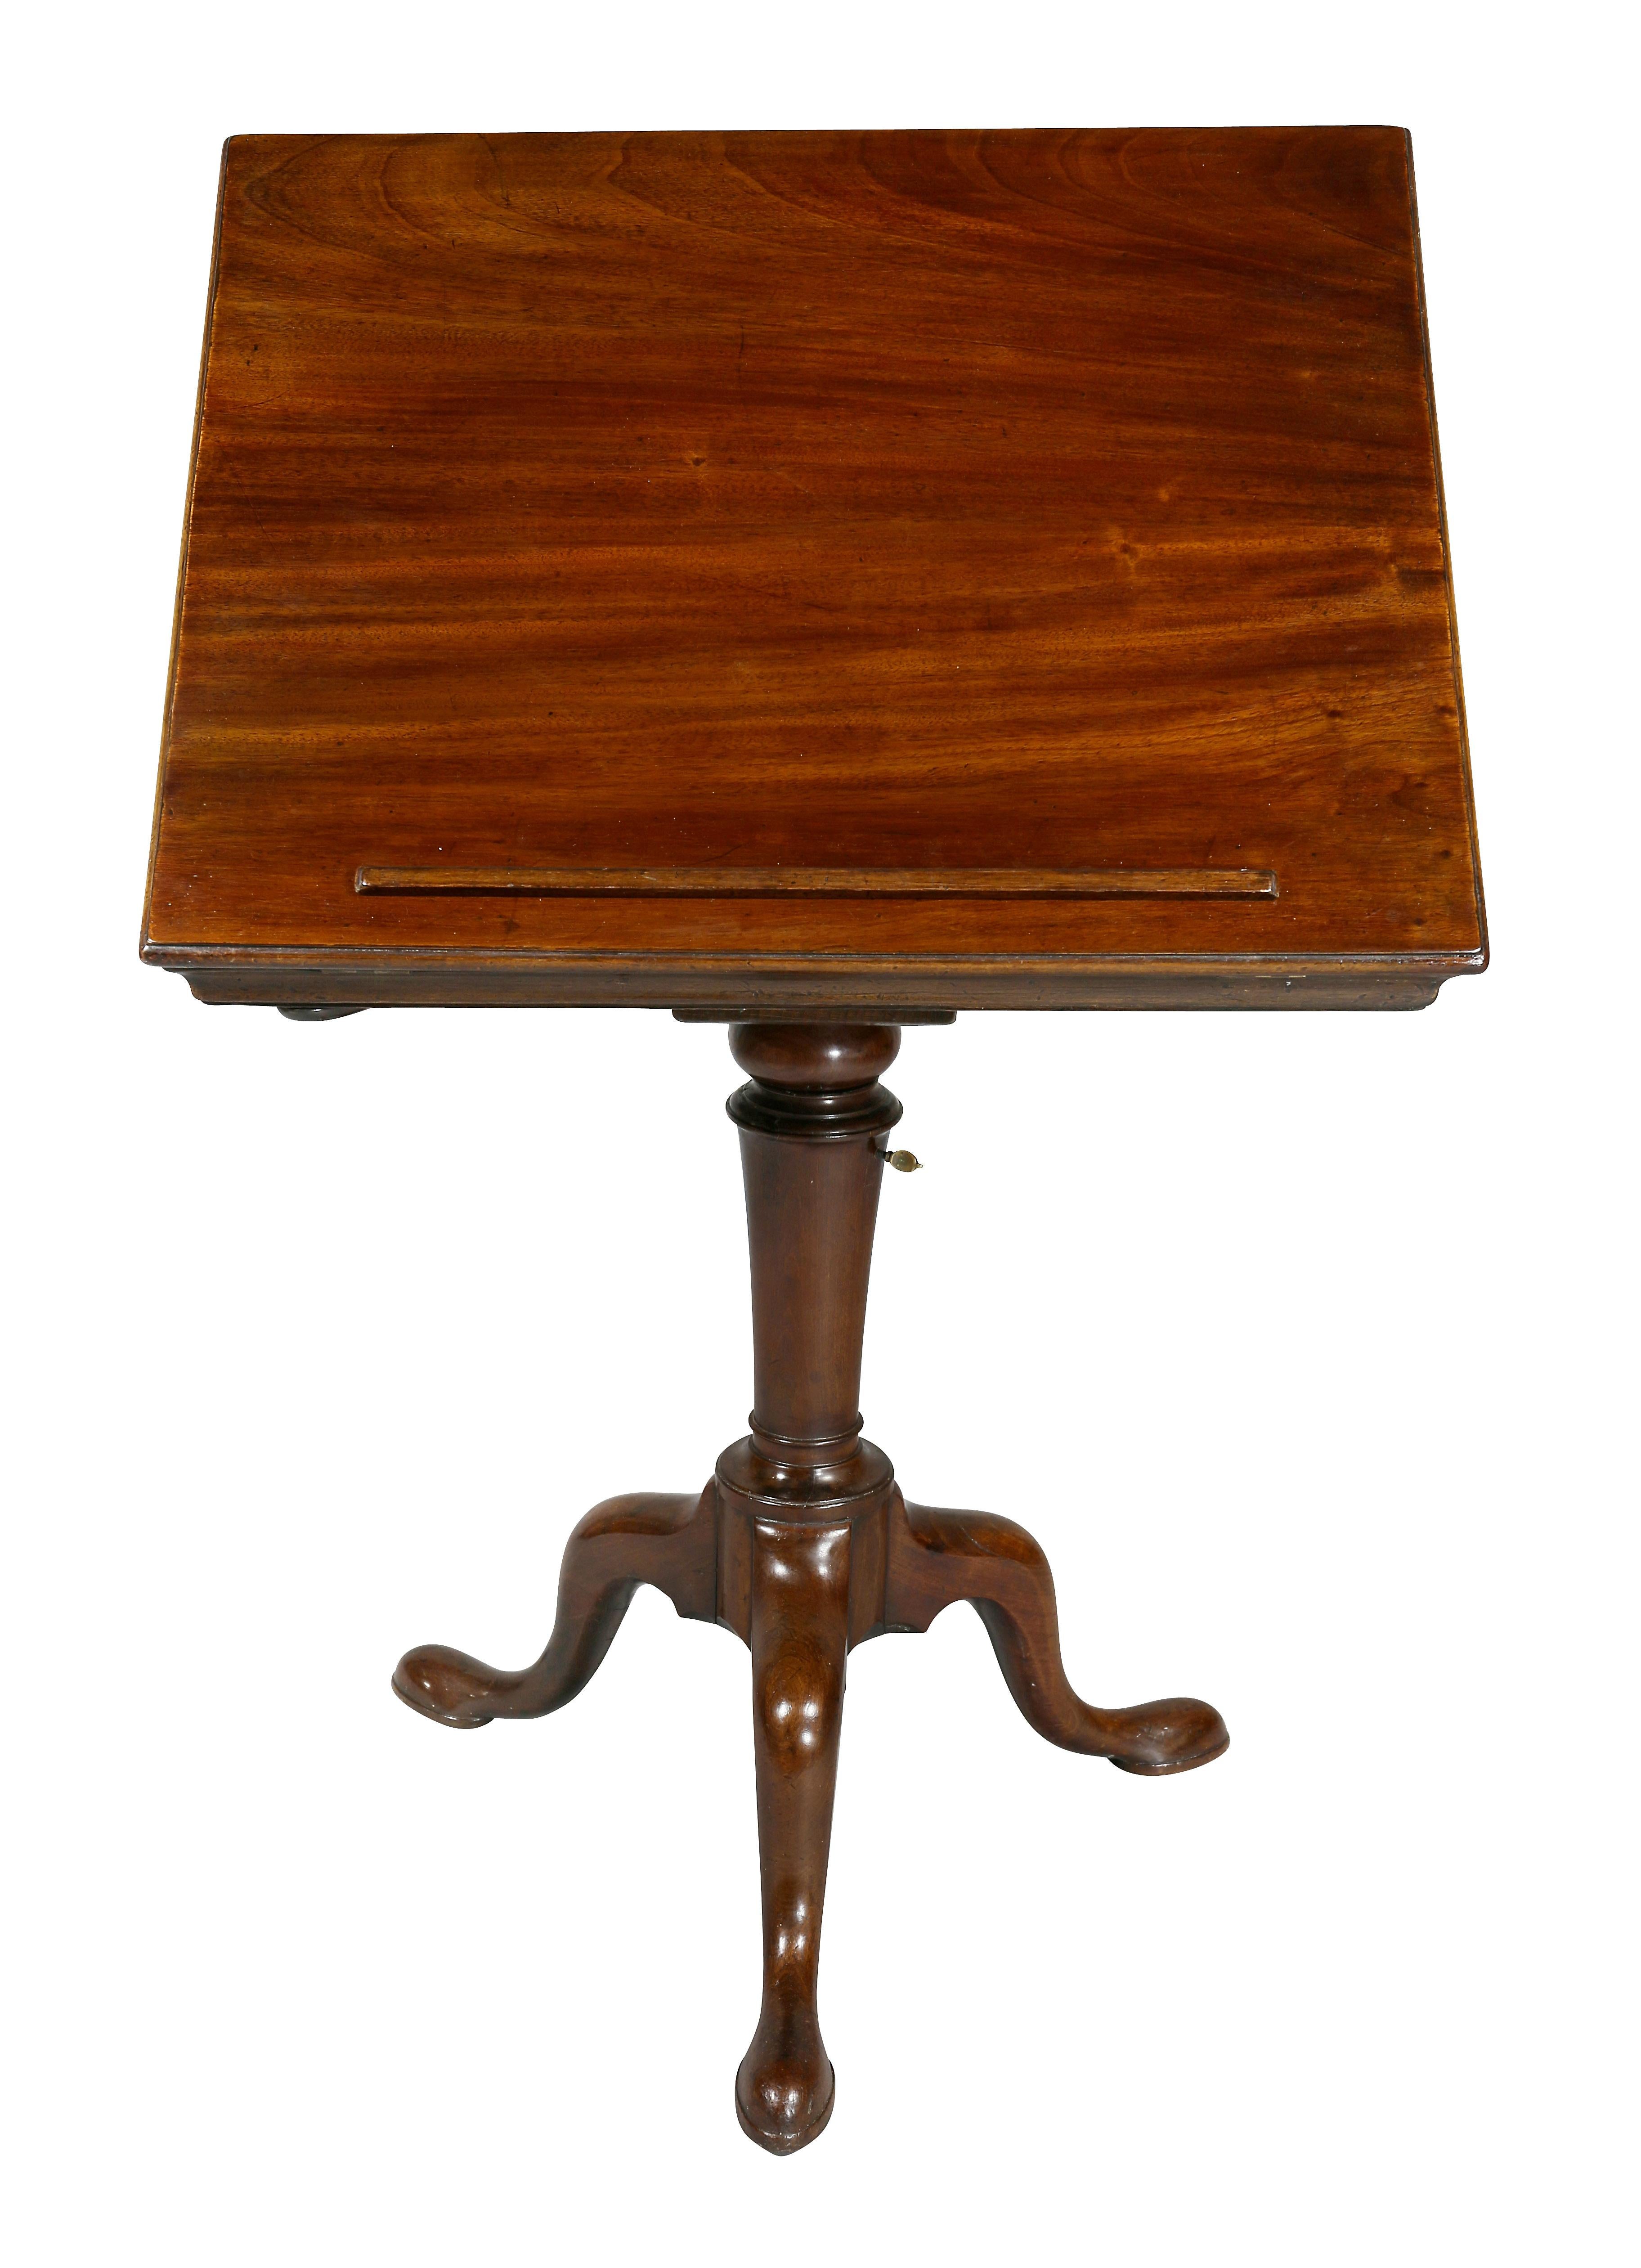 With rectangular hinged adjustable top over a turned support and candleholder, tripartite cabriole legs and pad feet.